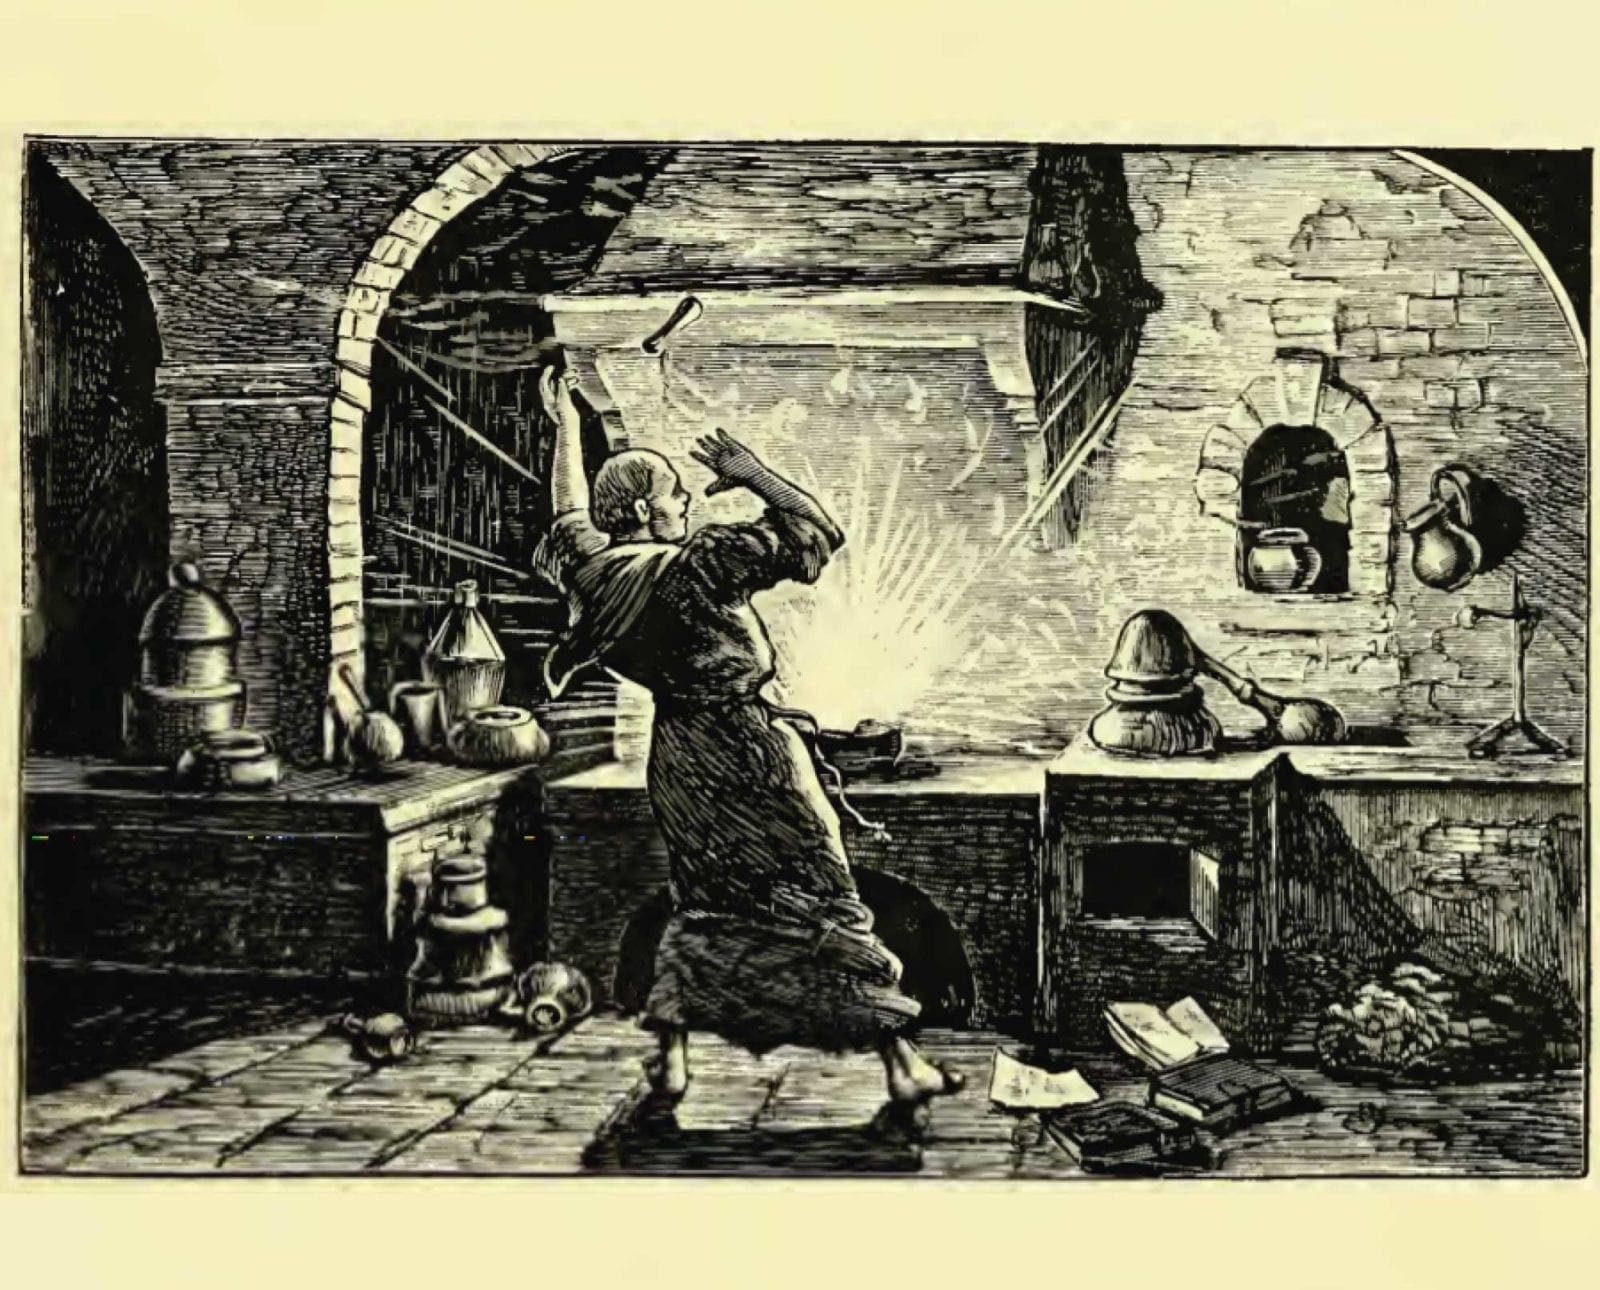 A medieval engraving of an early experiment with gunpowder